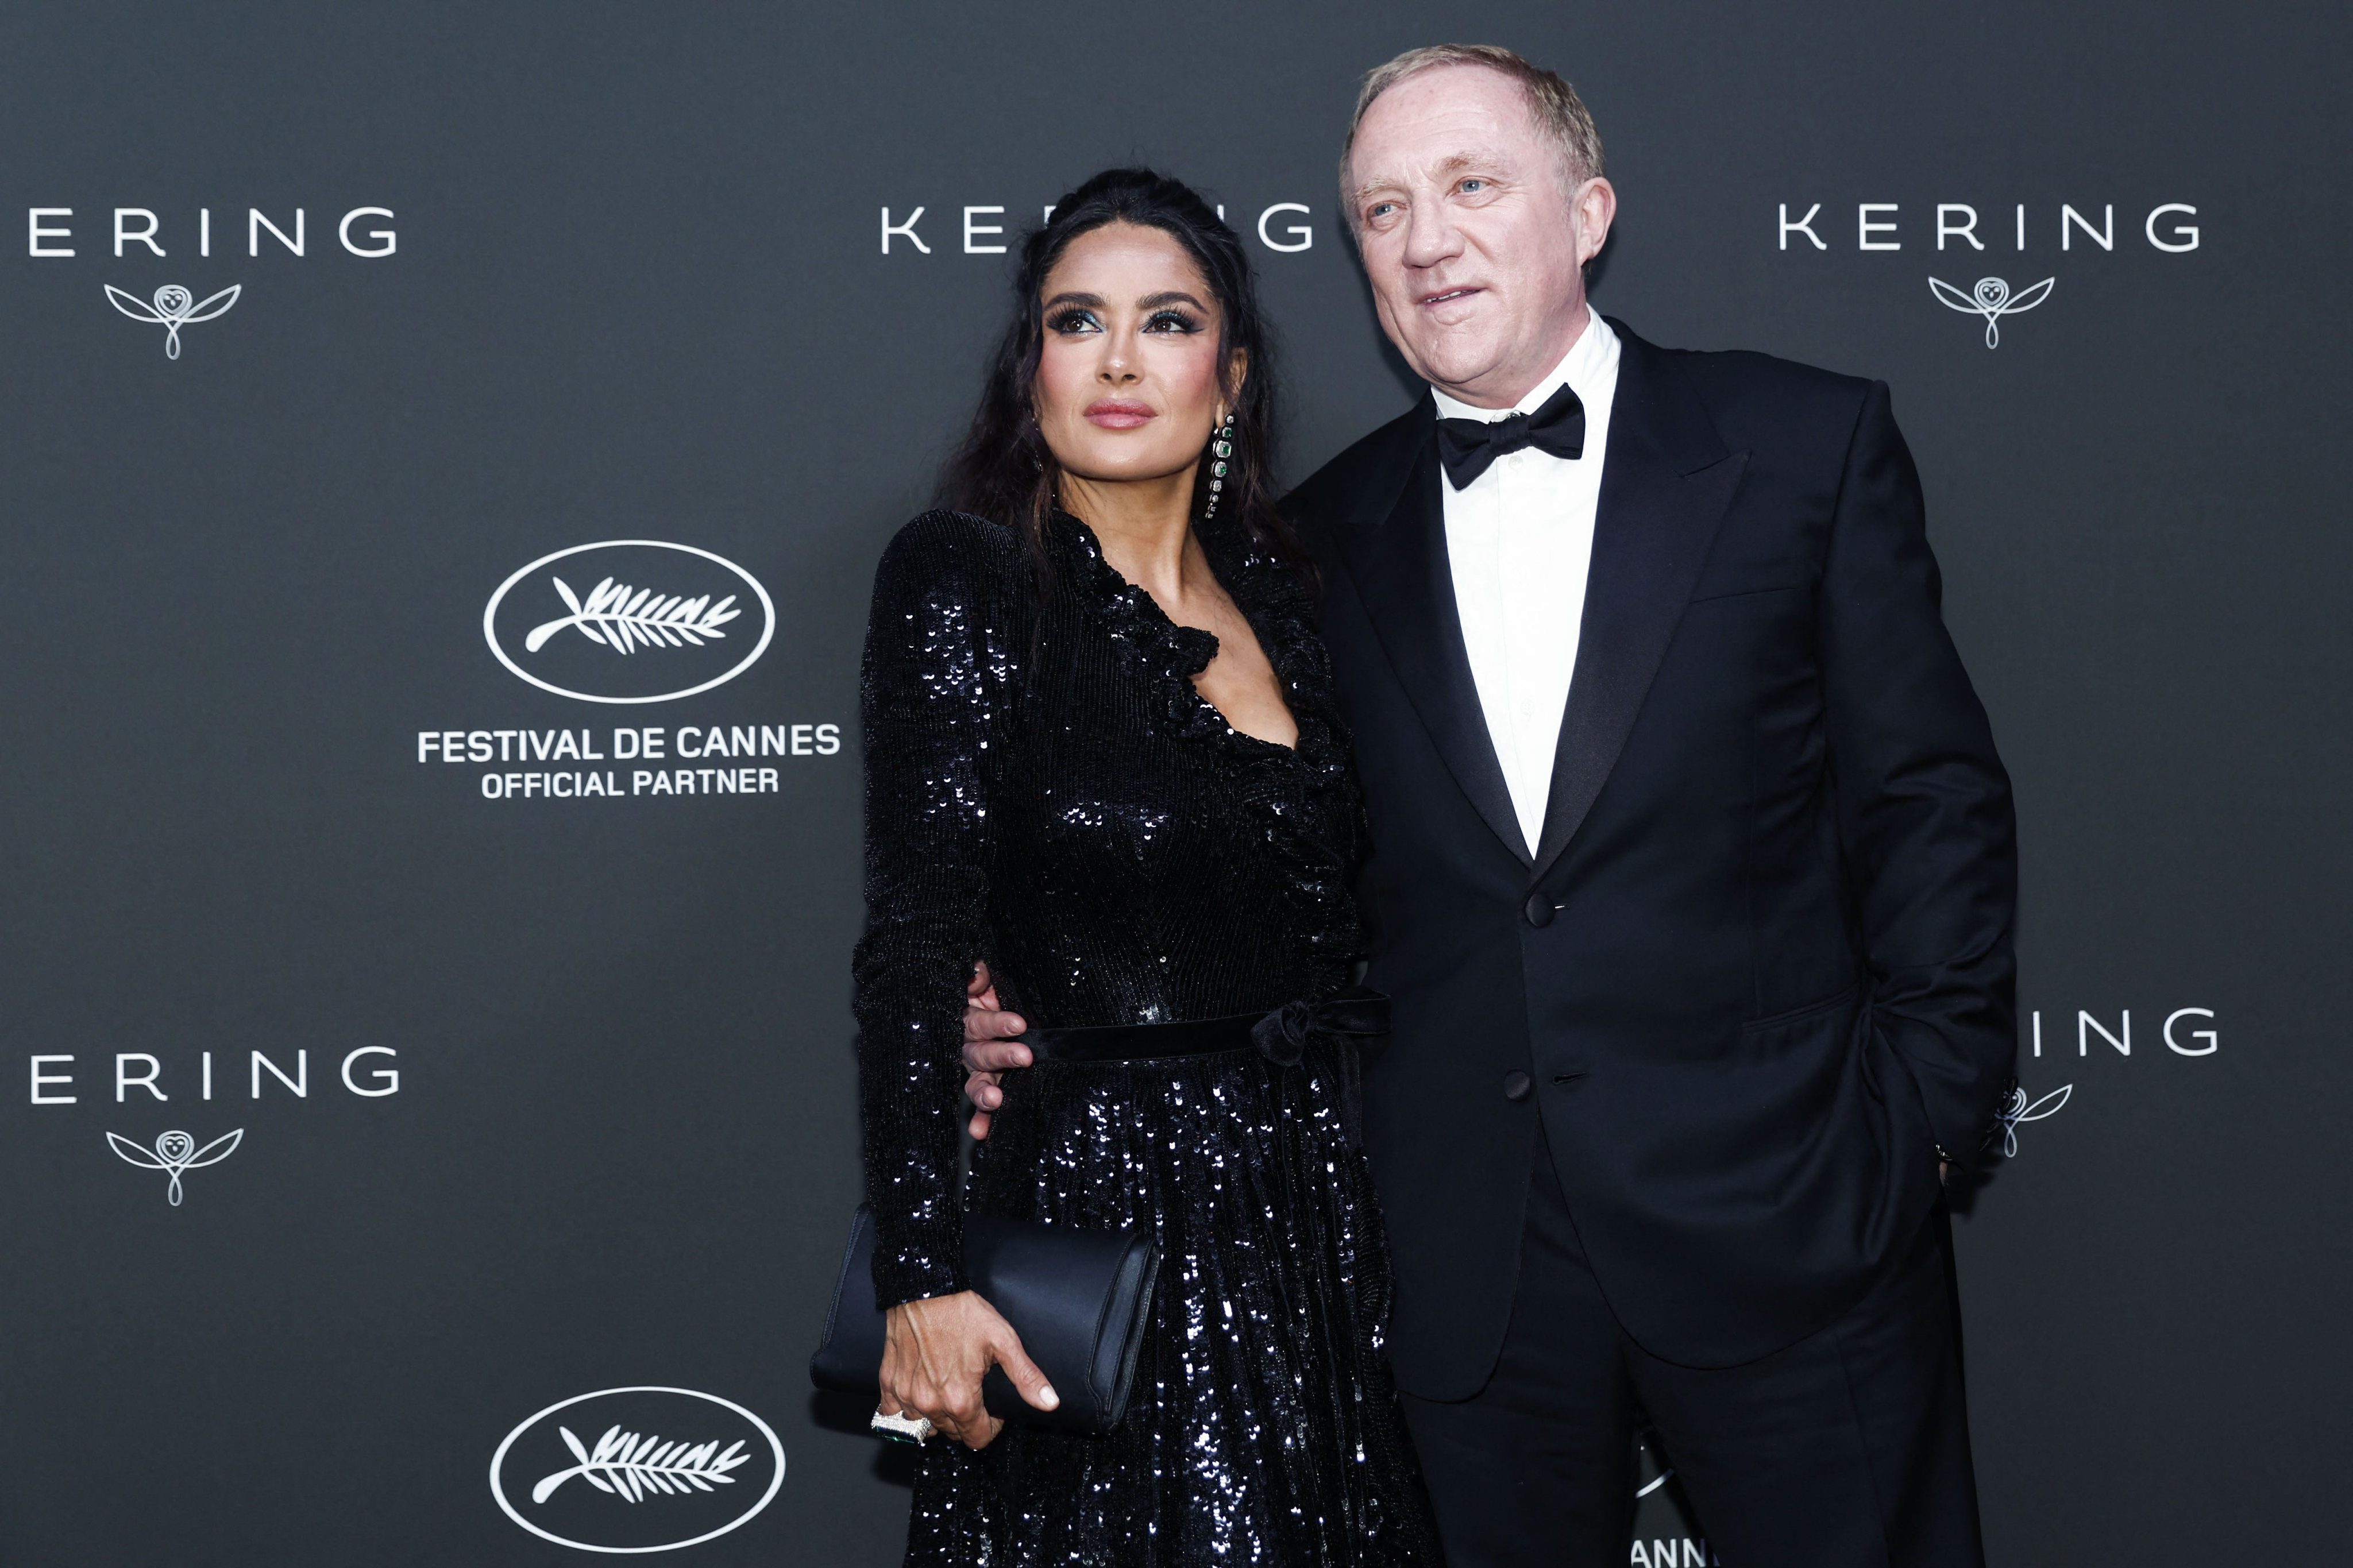 Salma Hayek and husband François-Henri Pinault, the French billionaire behind Kering SA group, who’s said to be in talks about acquiring the CAA talent agency. Photo: Reuters